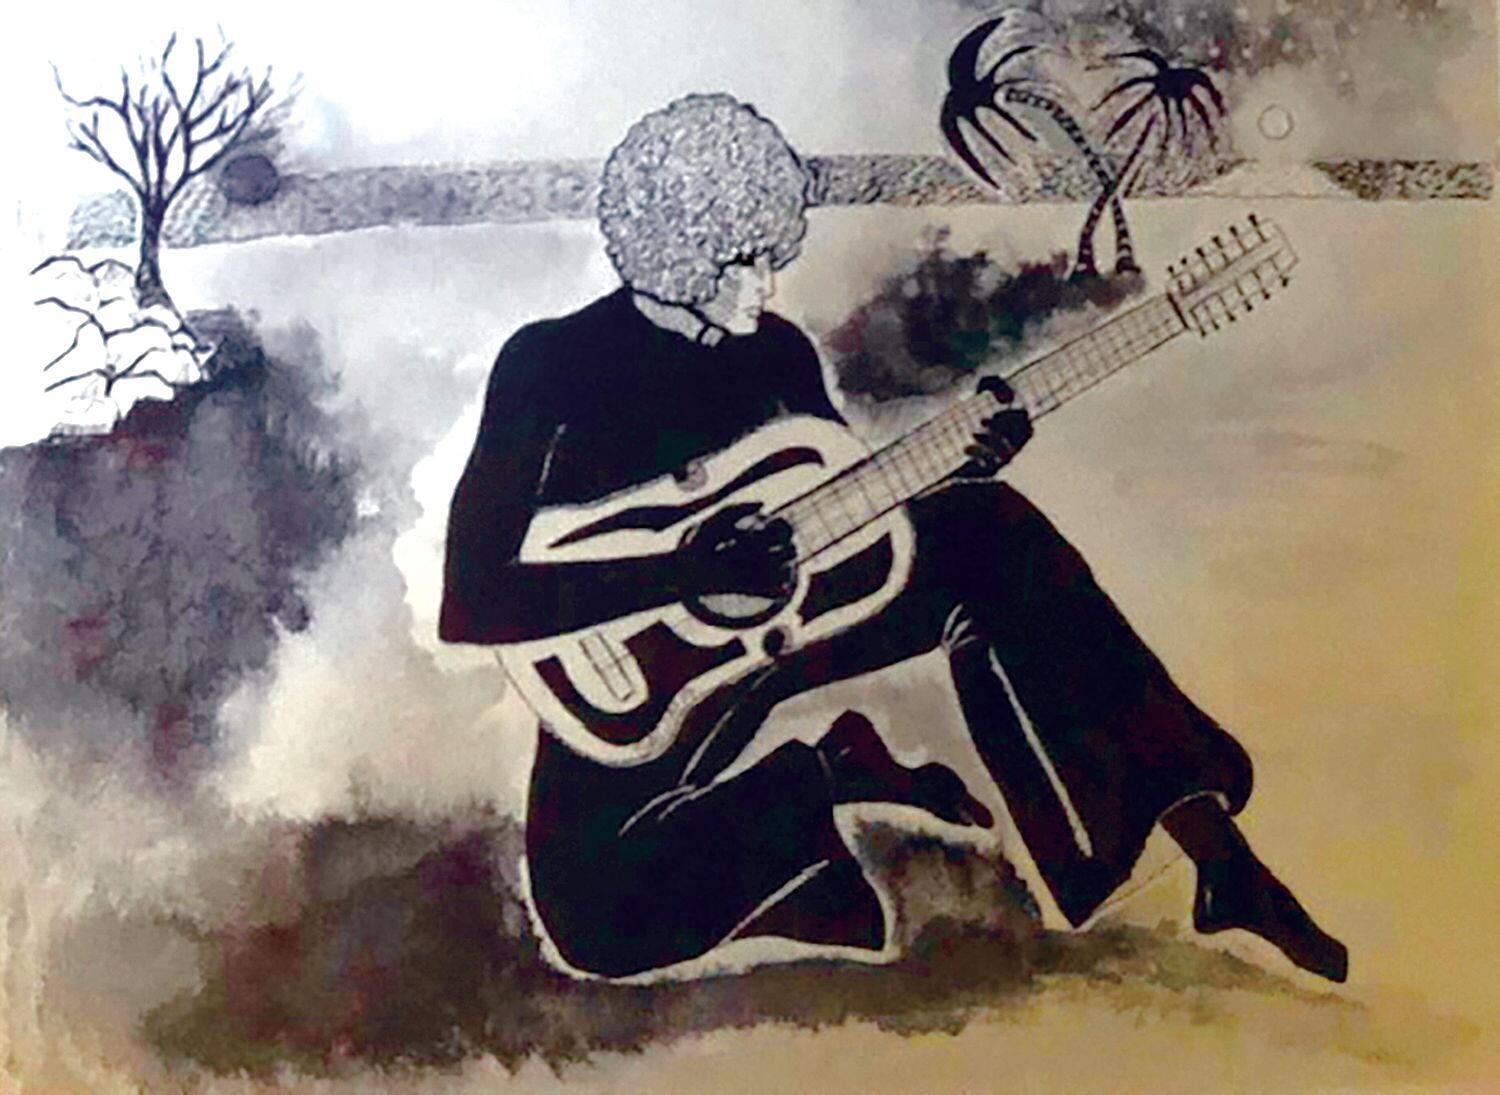 Drawing of a person with curly hair playing a guitar while sitting on a beach or desert